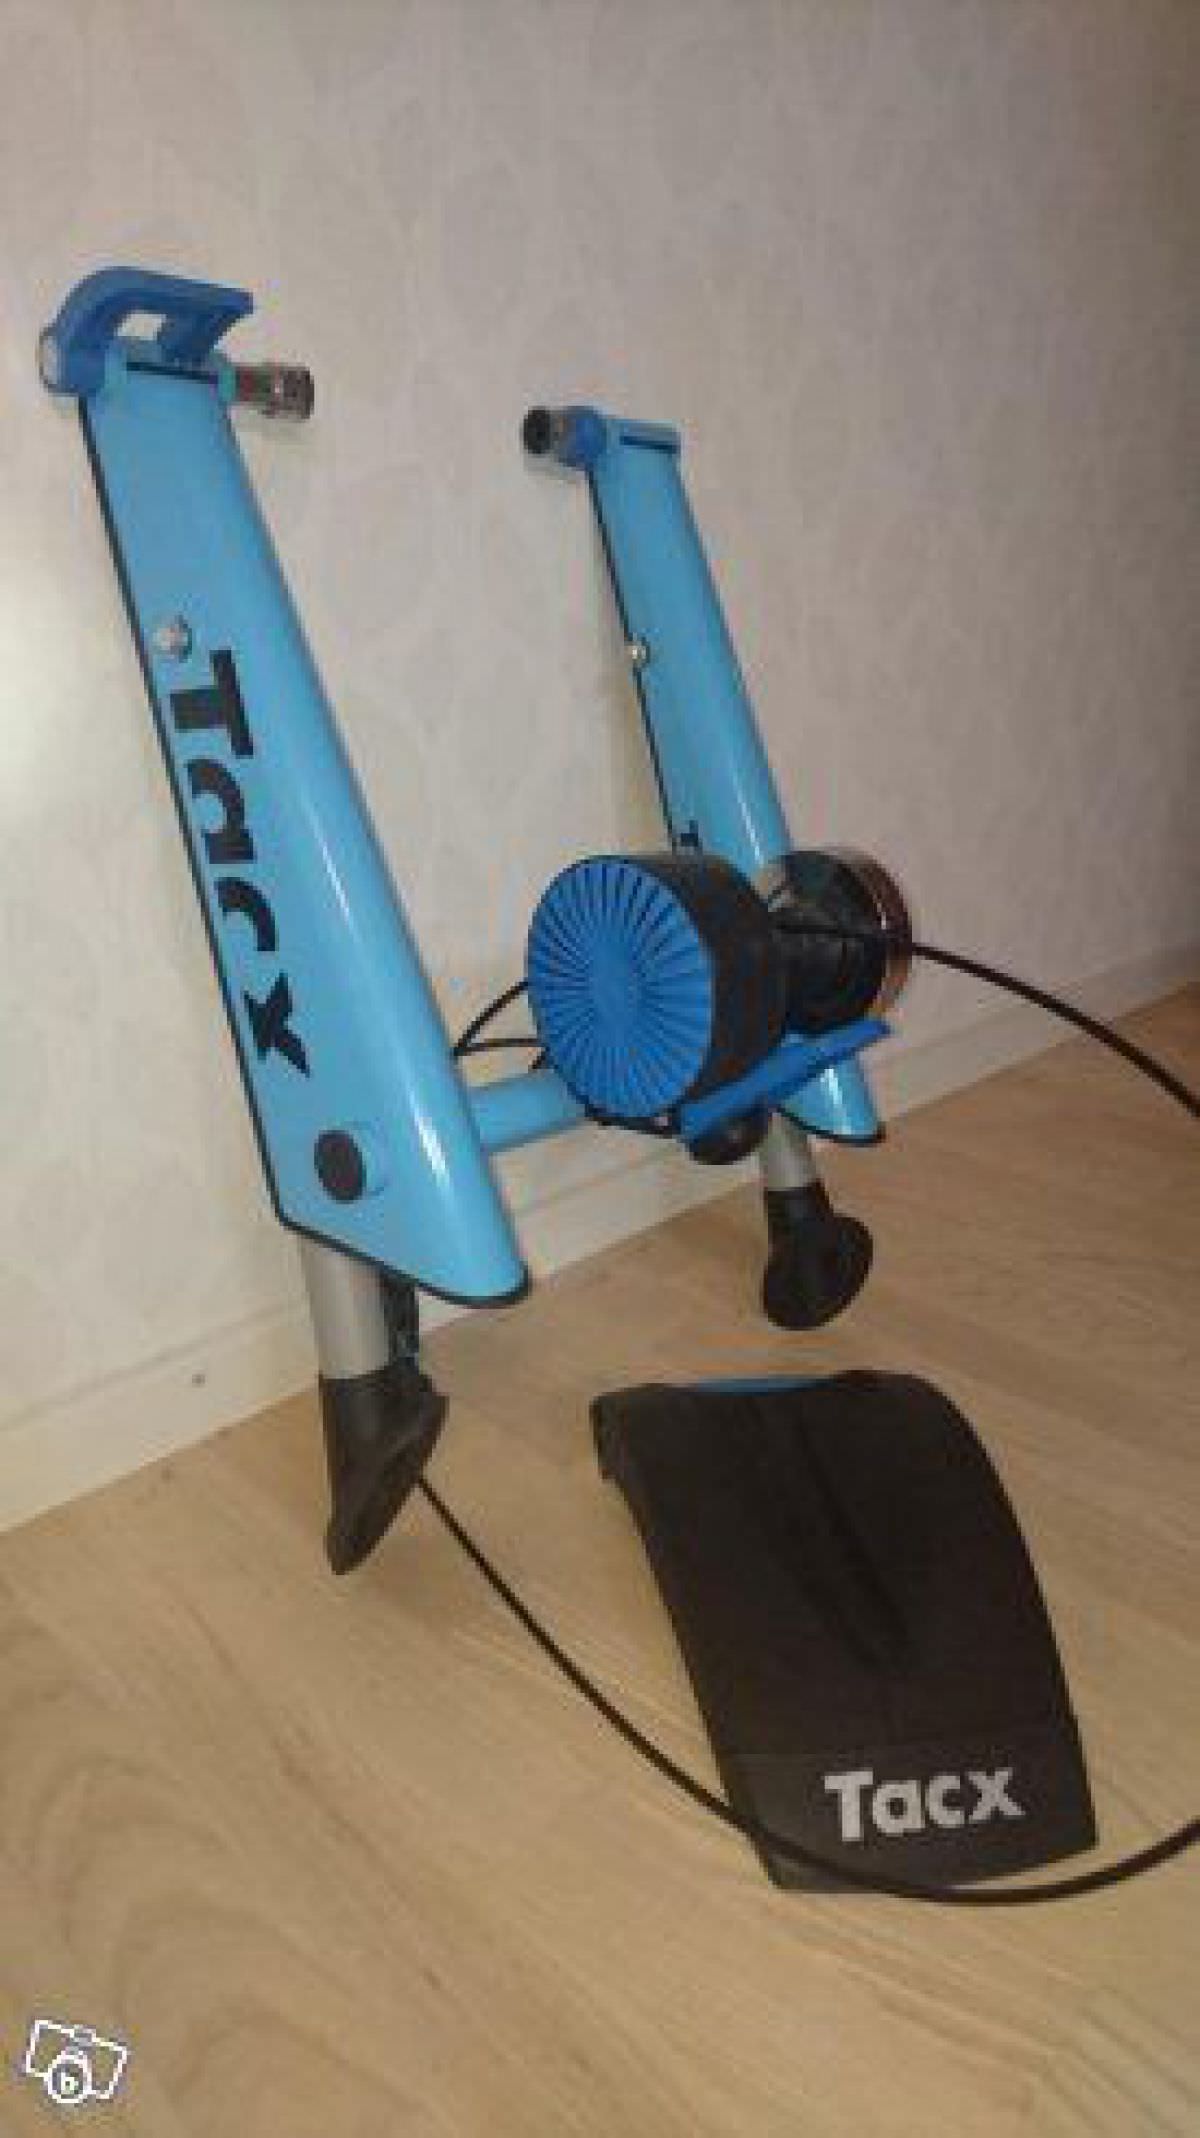 Trainer Tacx Blue Matic